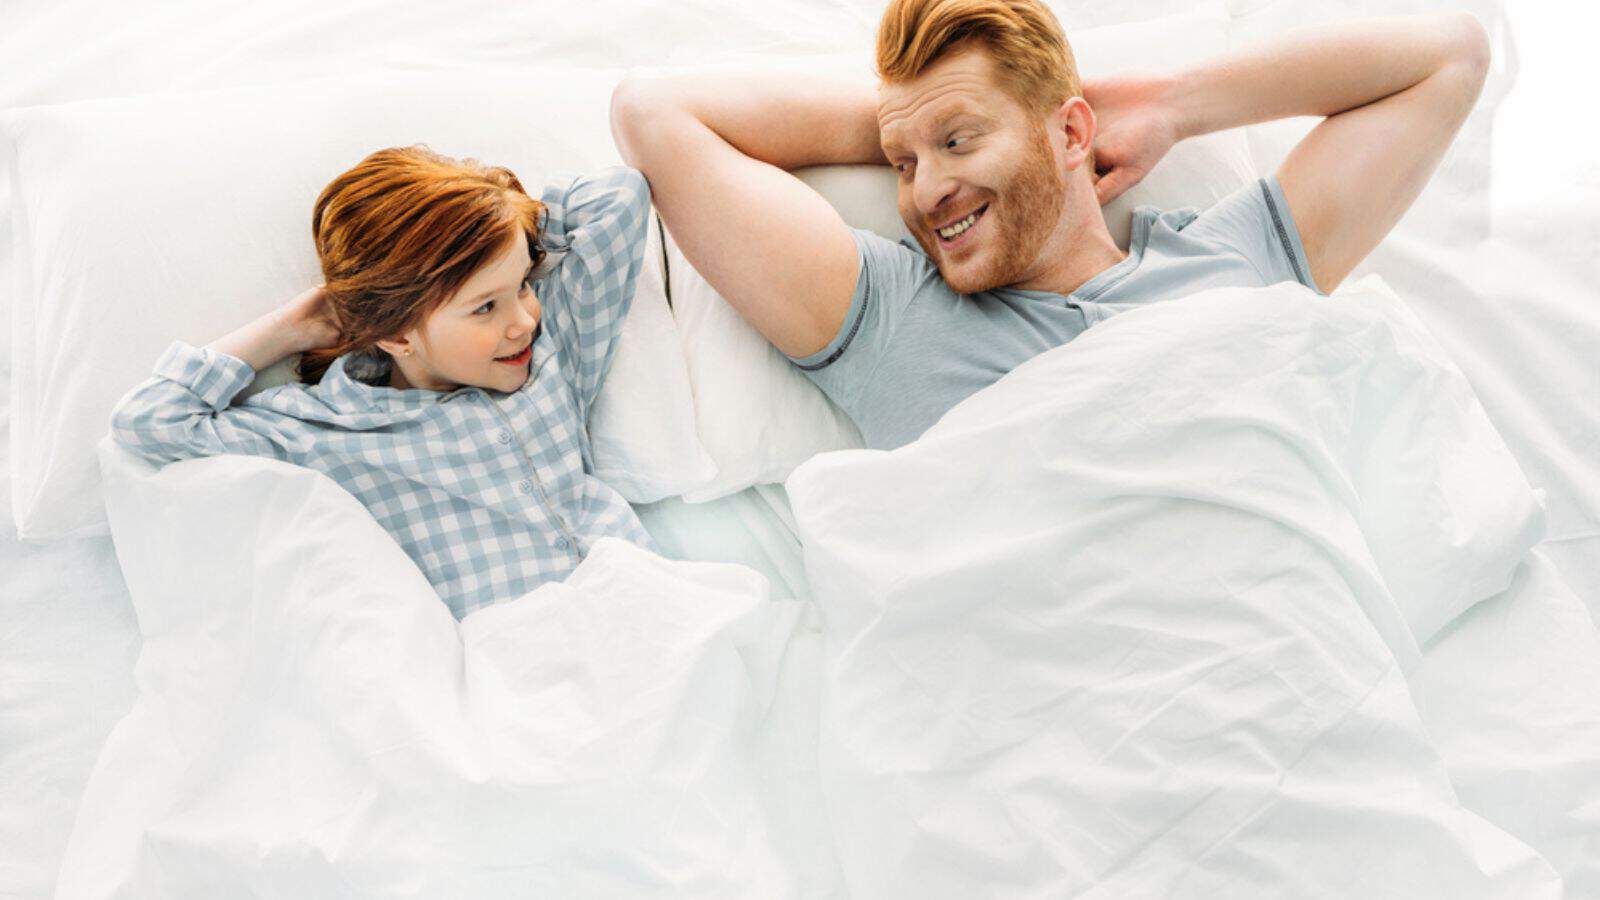 Happy father and daughter lying together in bed and smiling each other